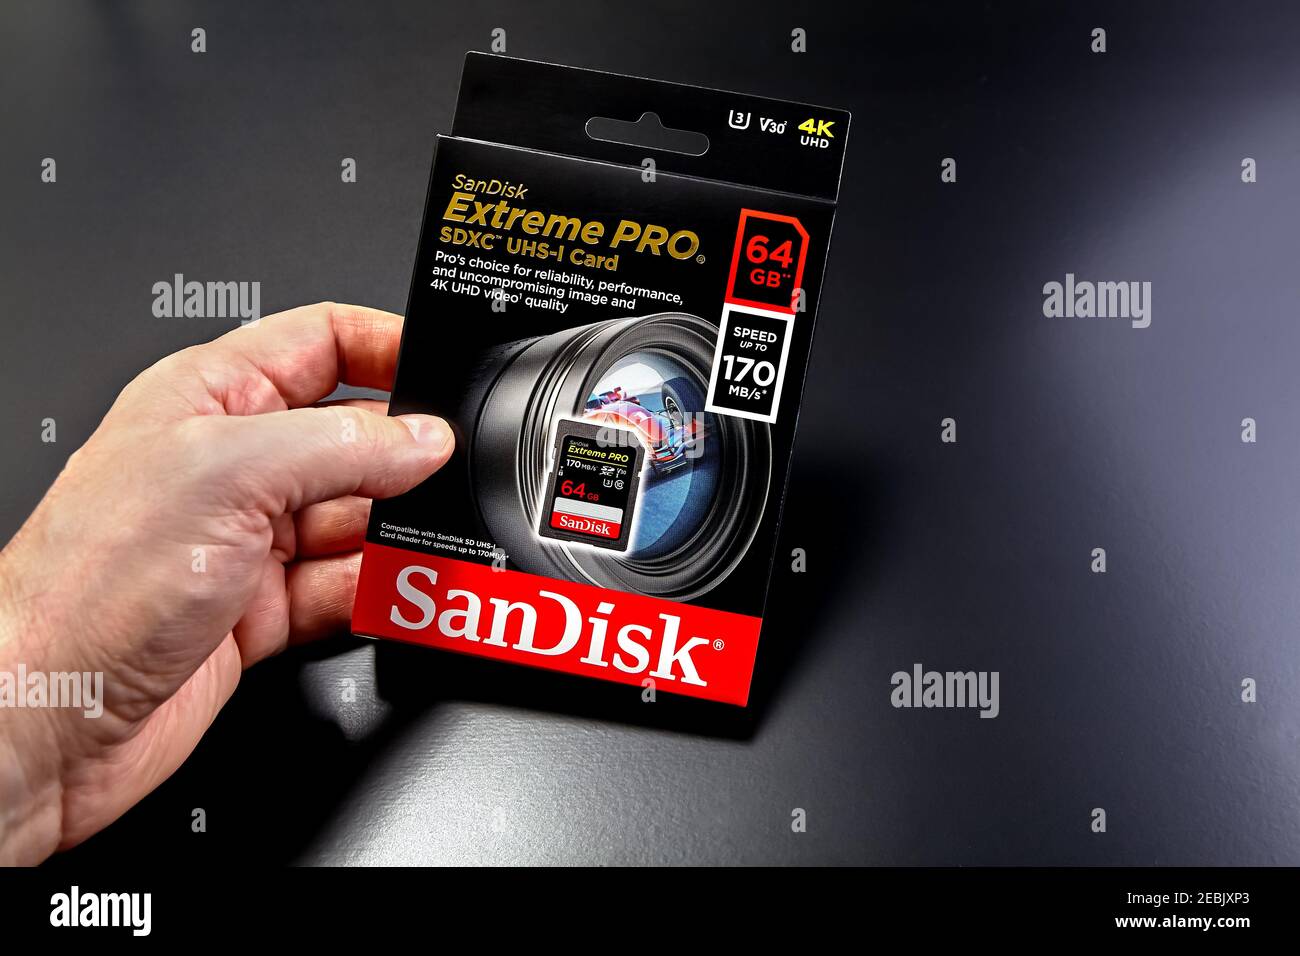 St. Petersburg, Russia - January 9, 2021: SanDisk Extreme PRO 64GB SDXC  Memory Card up to 170MB/s, Class 10, U3, V30 Stock Photo - Alamy